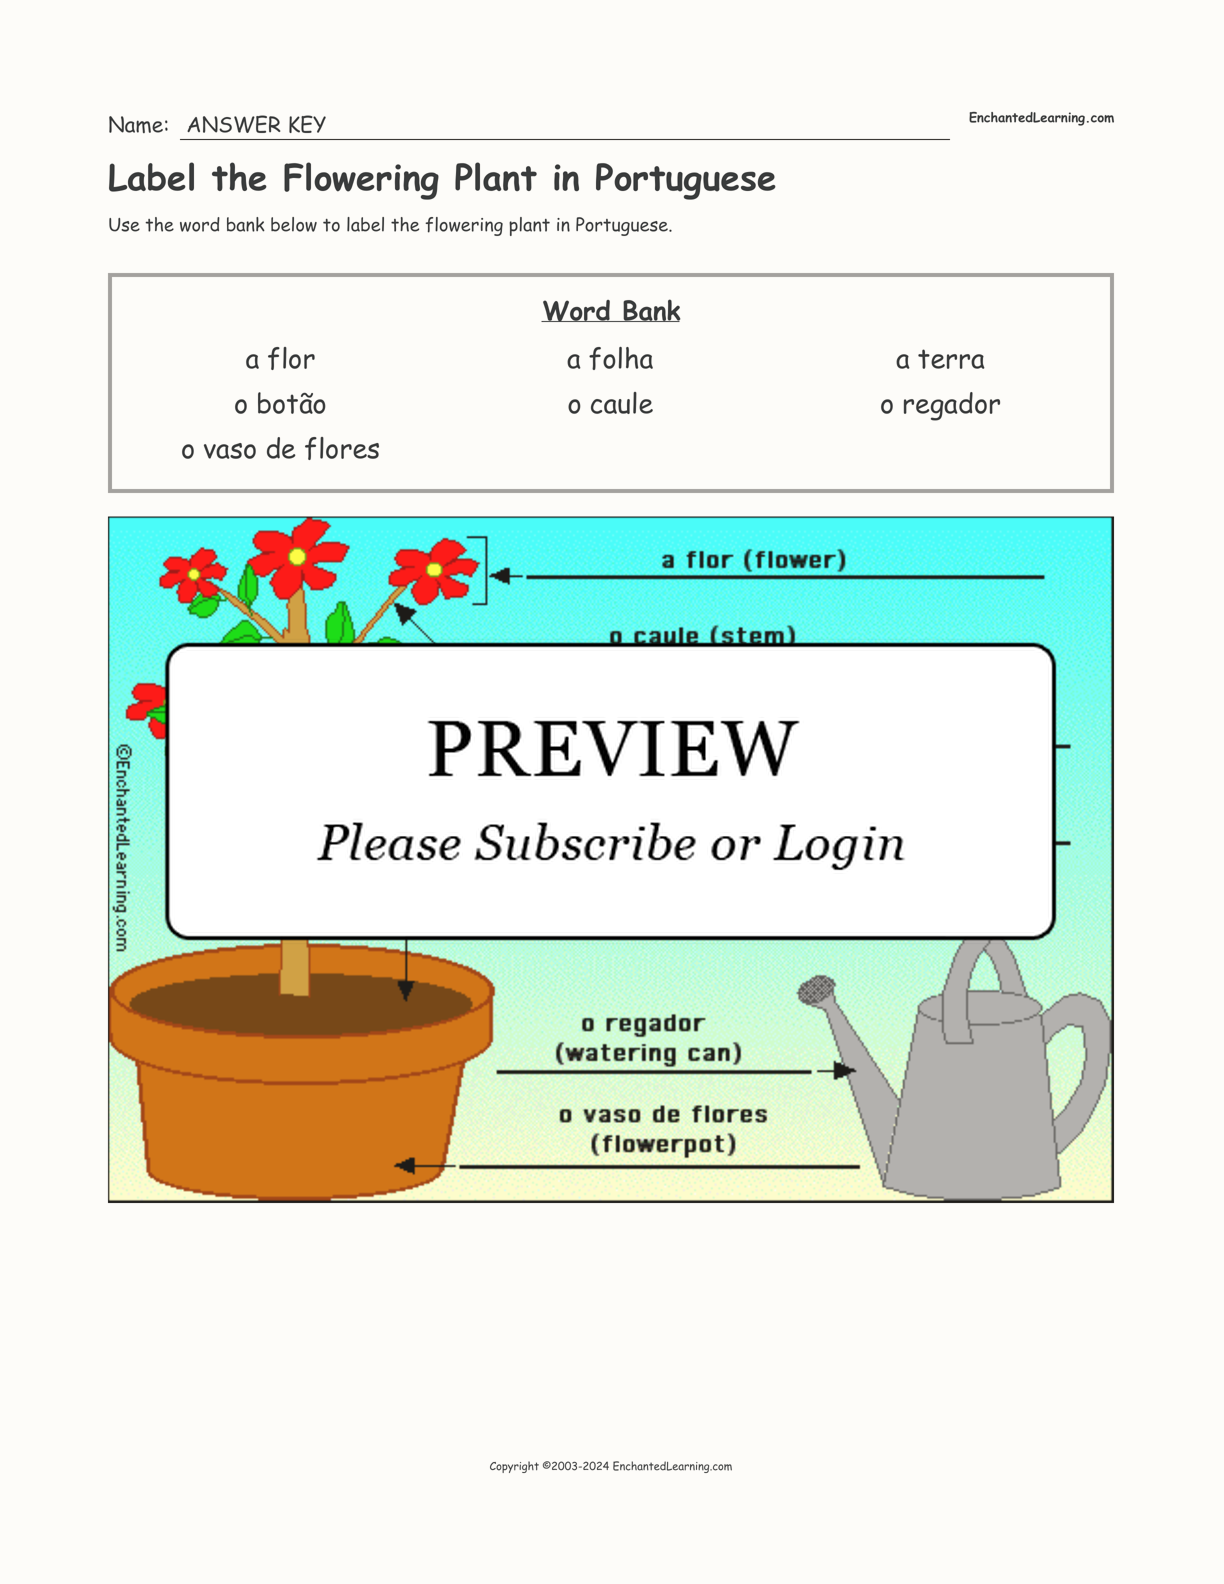 Label the Flowering Plant in Portuguese interactive worksheet page 2